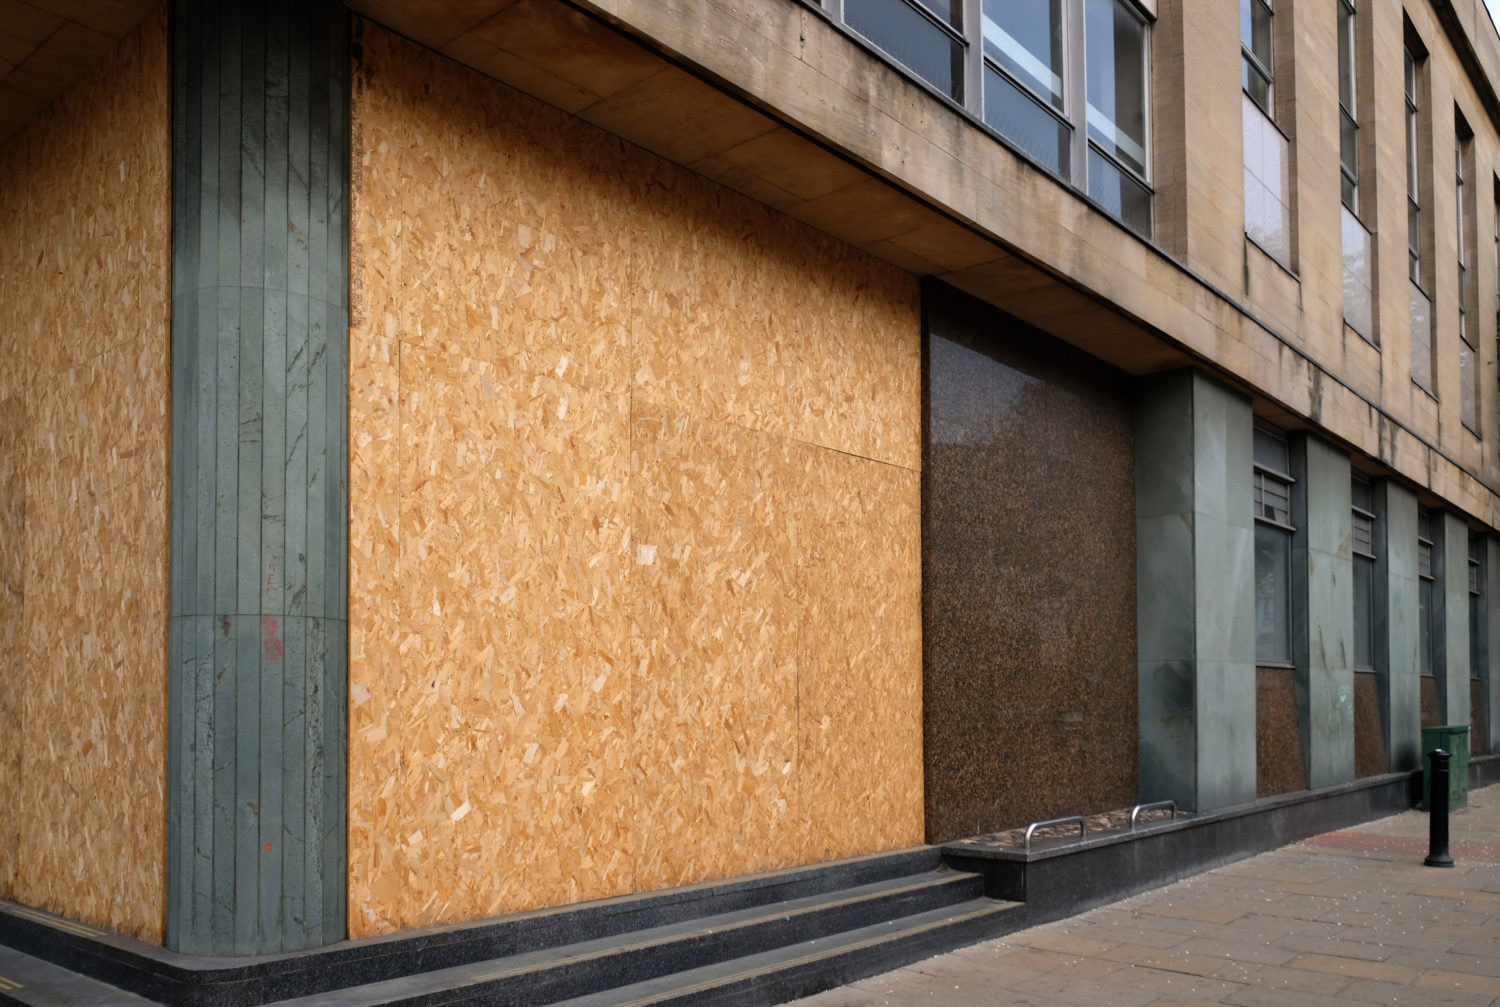 Empty Boarded Up Property In Major Uk City Centre.